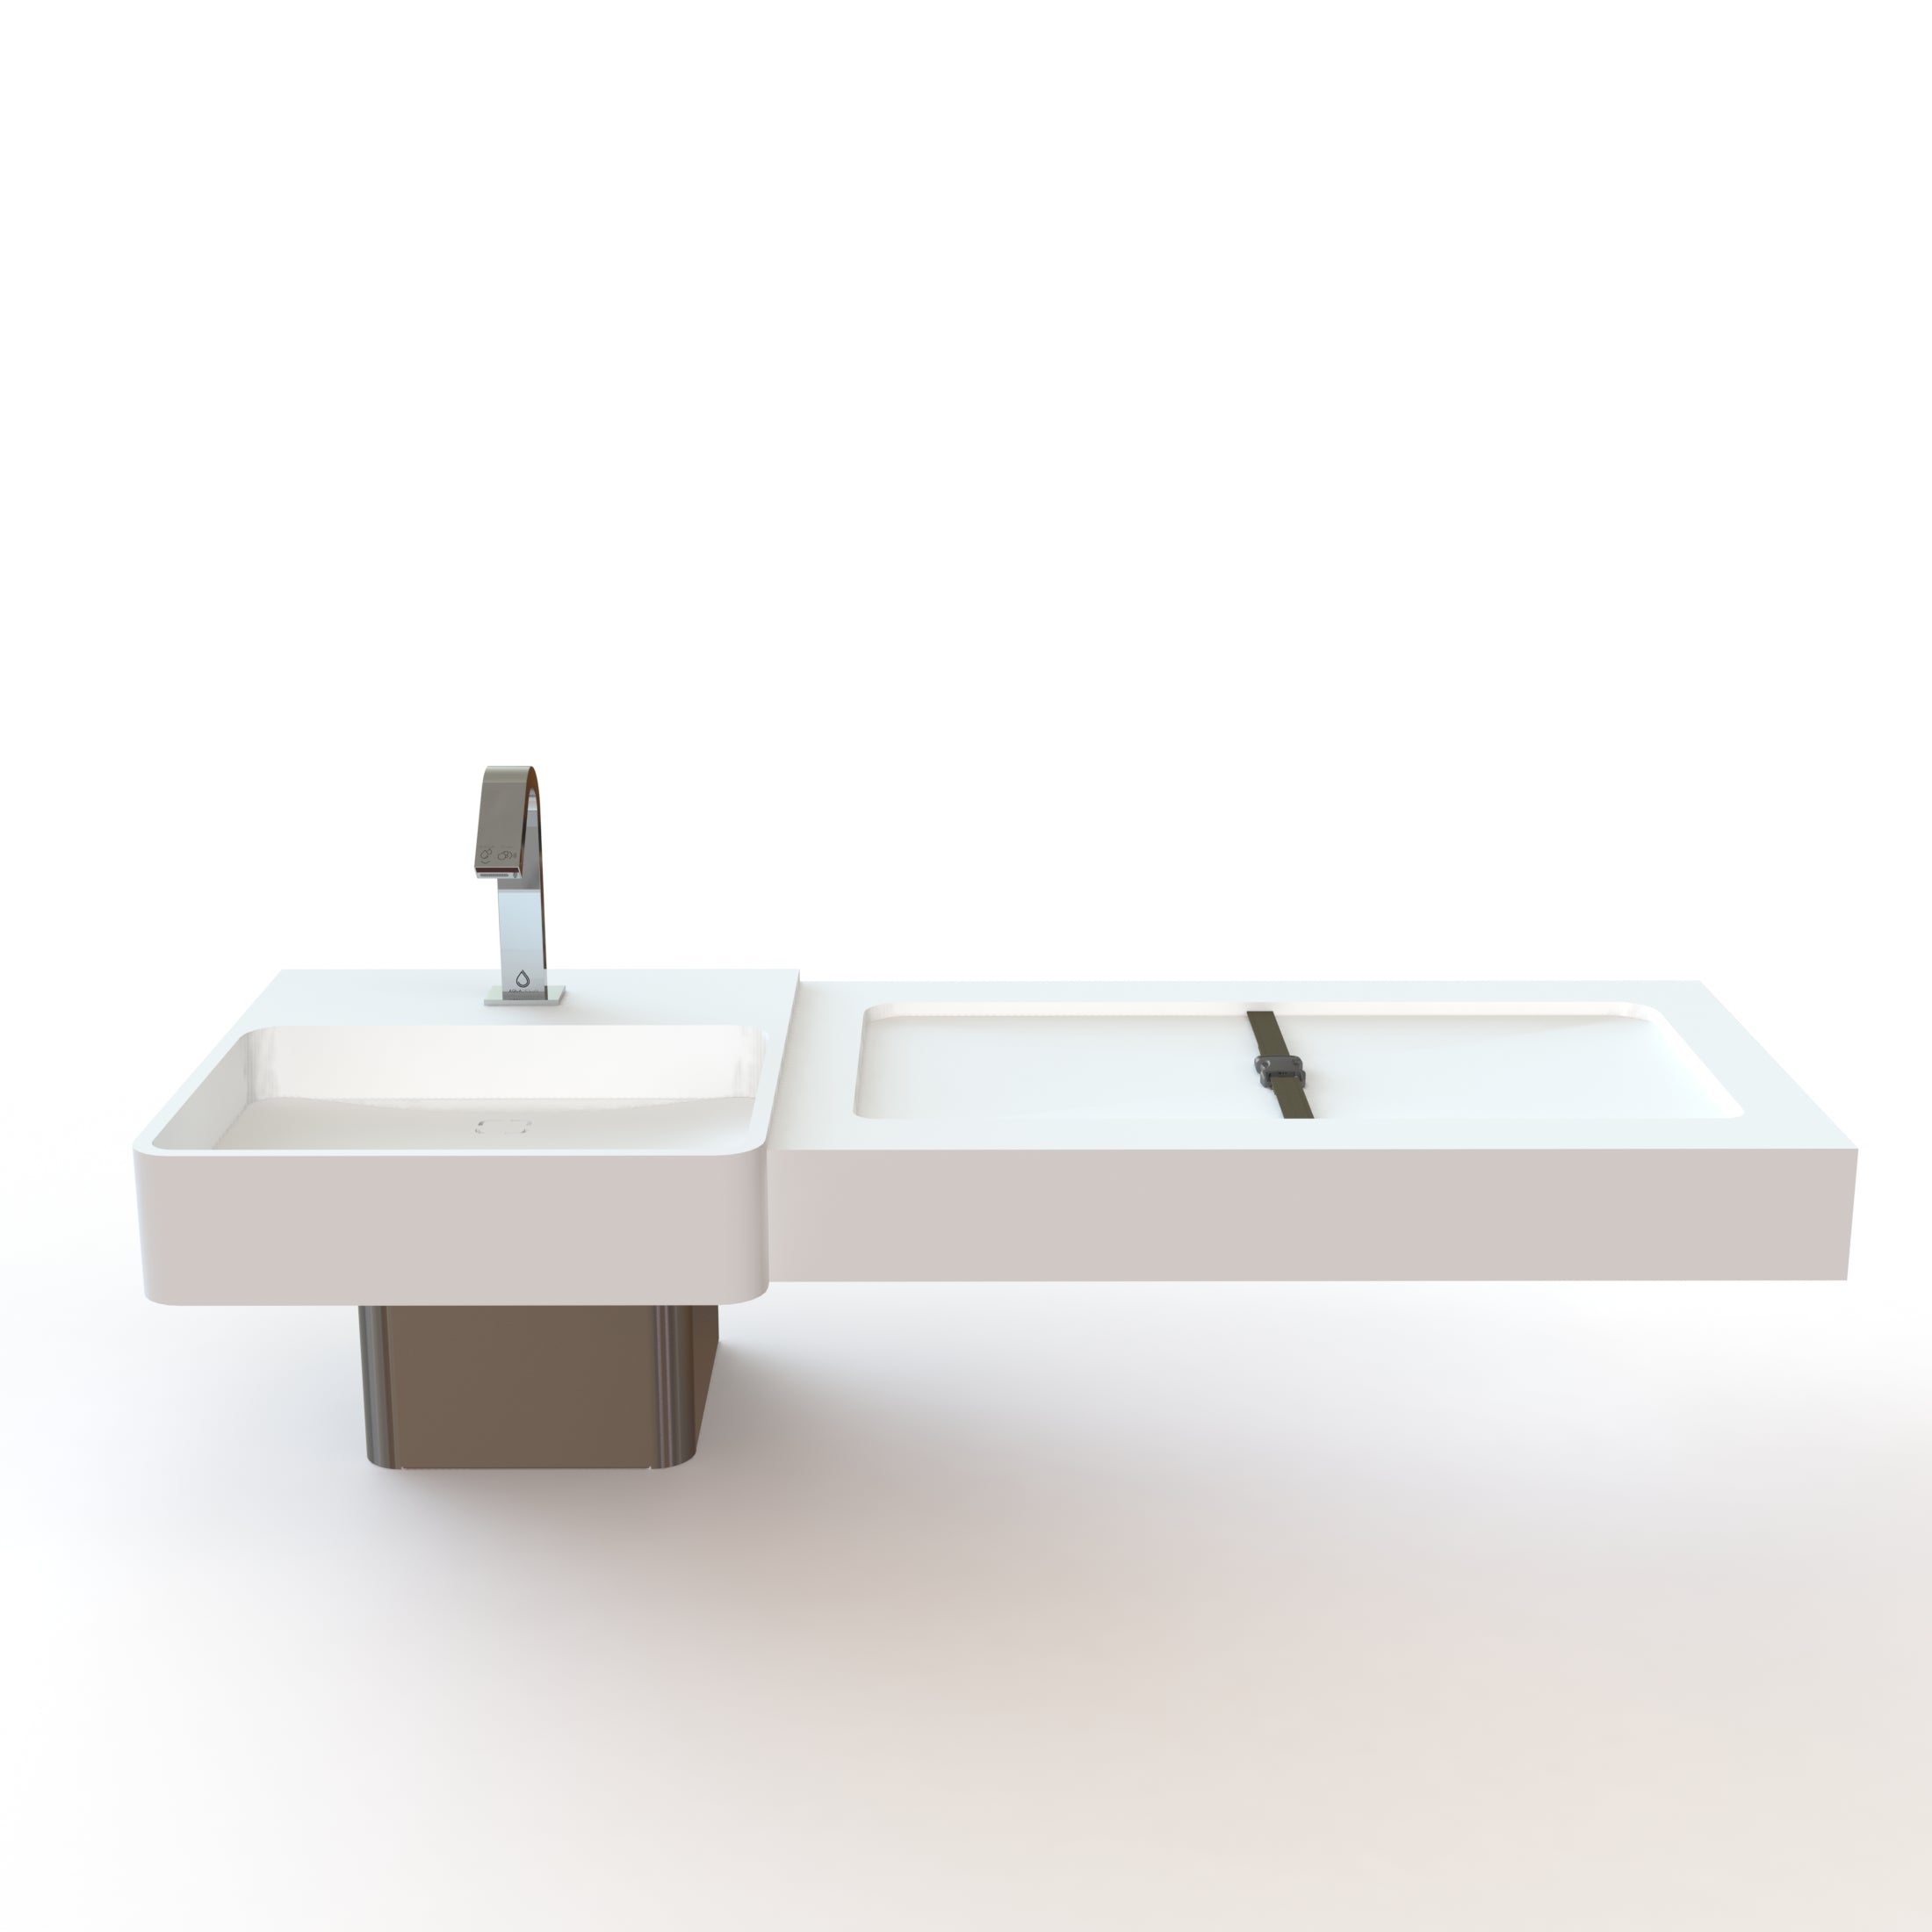 MODUS - Modus Single User Modular Solid Surface Lavatory for Public Restrooms with Baby Changer Combo